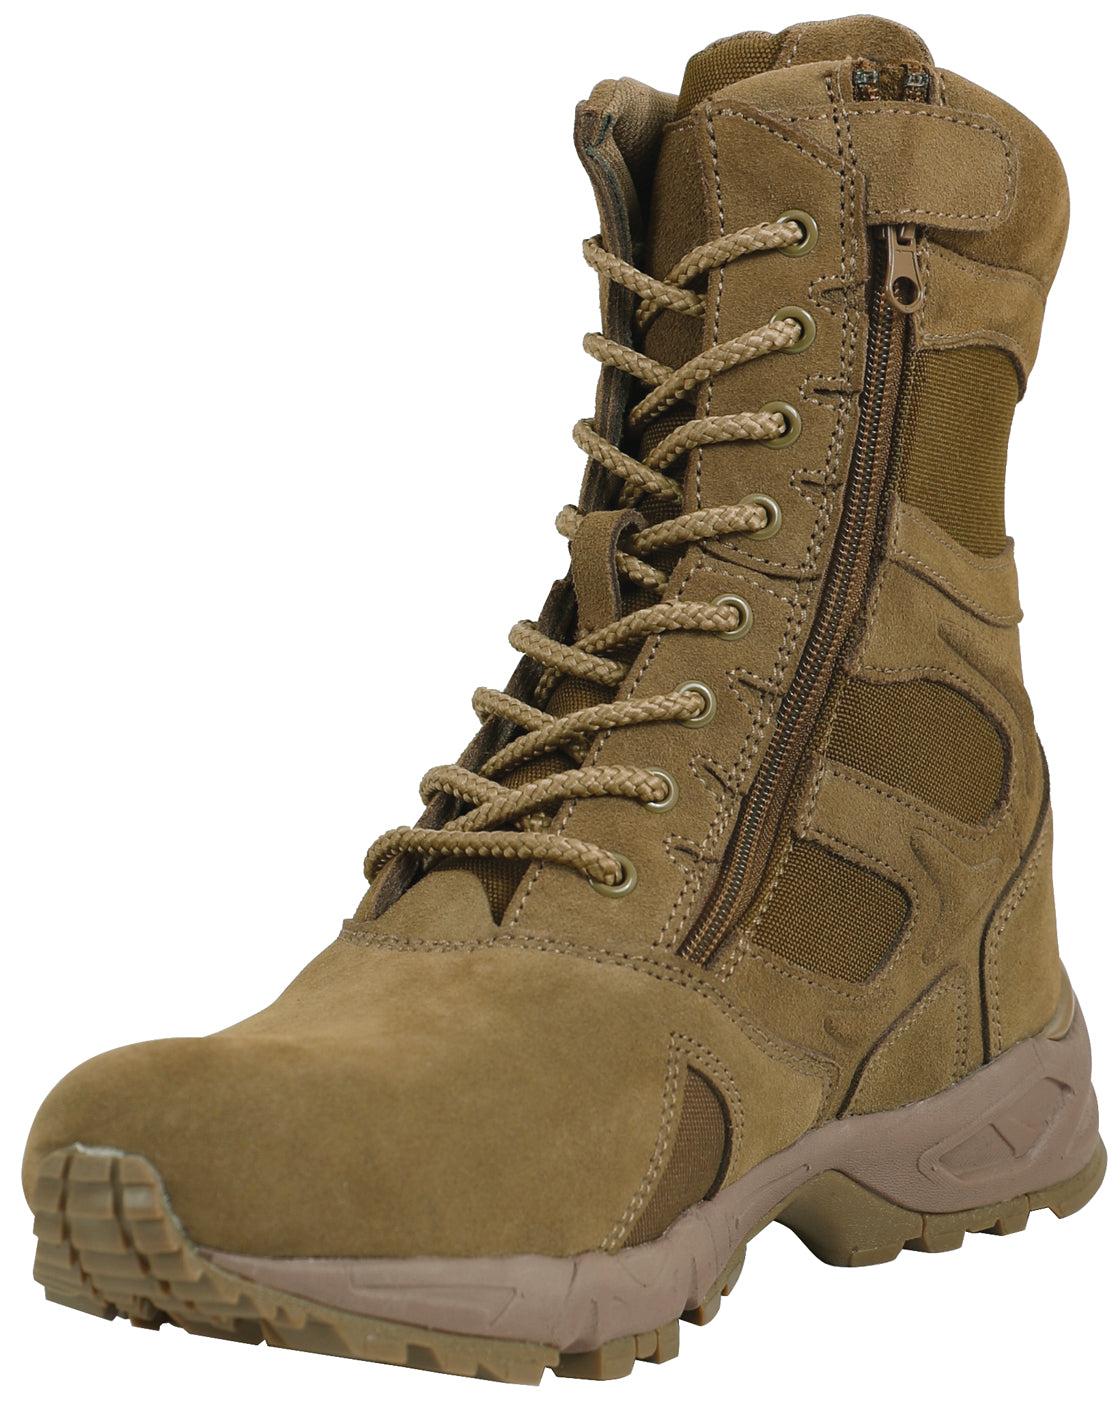 [AR 670-1][Zipper] Forced Entry Deployment Tactical Boots Coyote Brown AR 670-1